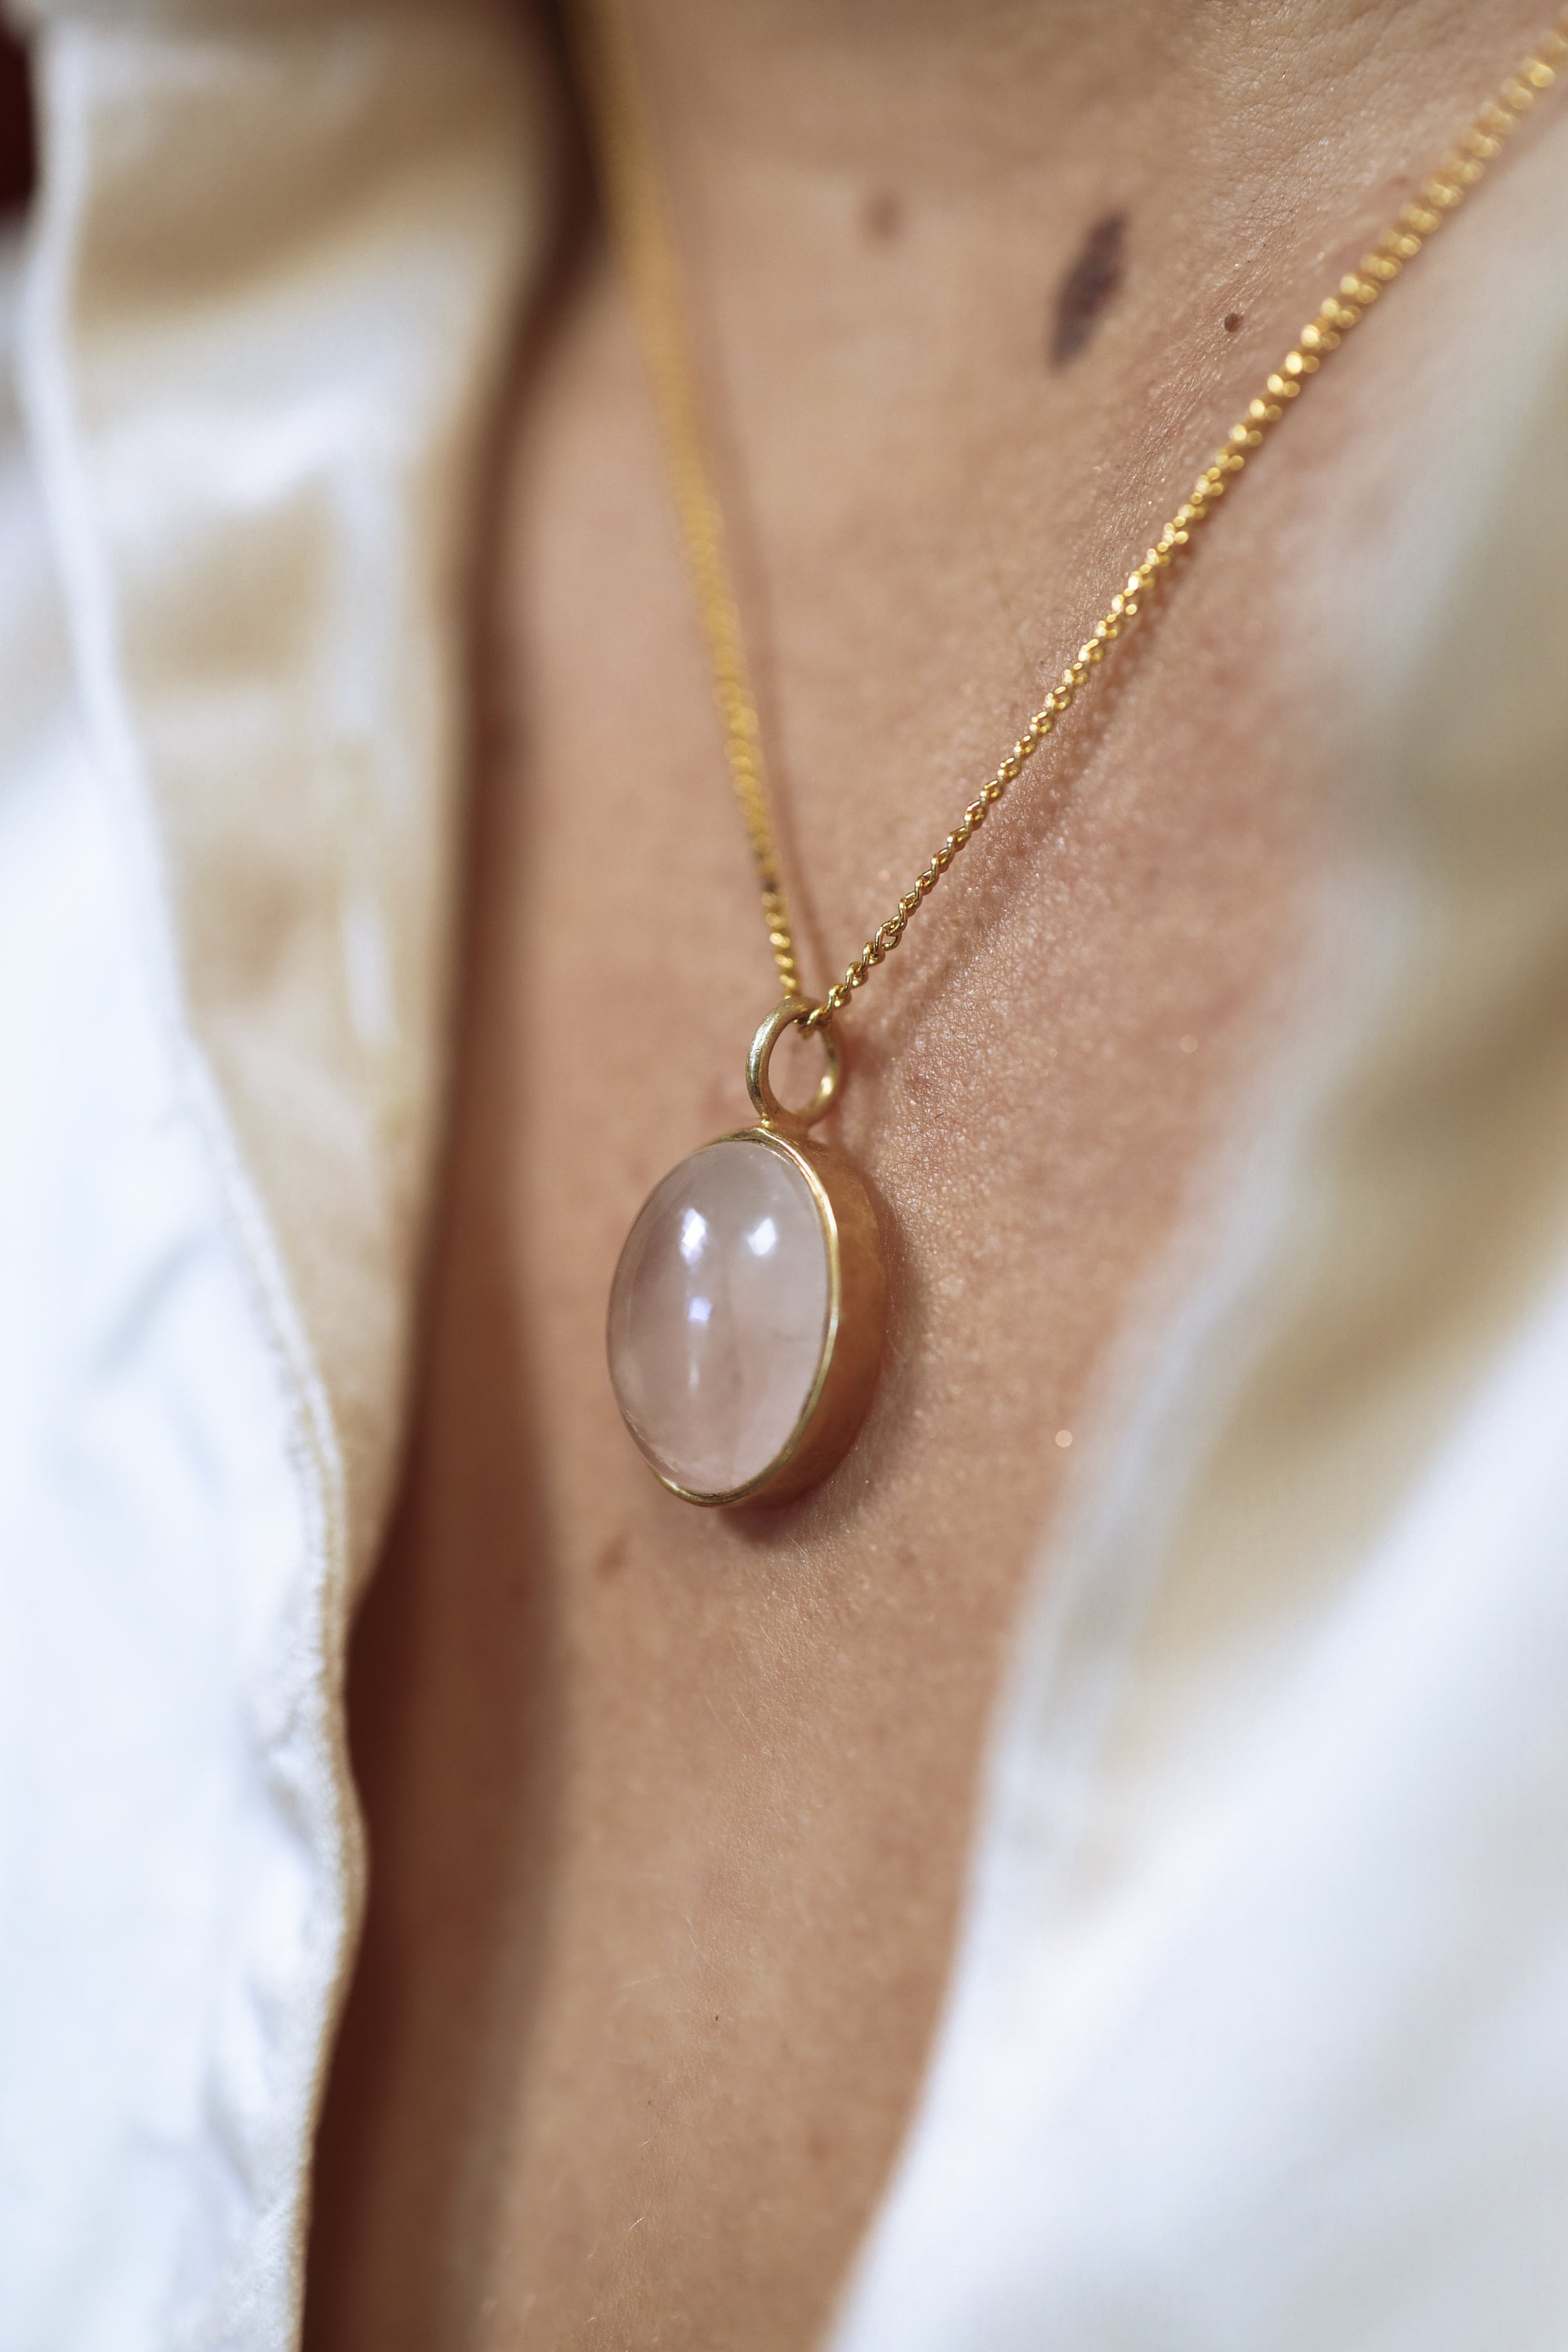 One AAA Oval Shaped Rose Quartz - Crystal Pendant Necklace - Gold Plated 925 Sterling Silver - Rustic hammer textured finish